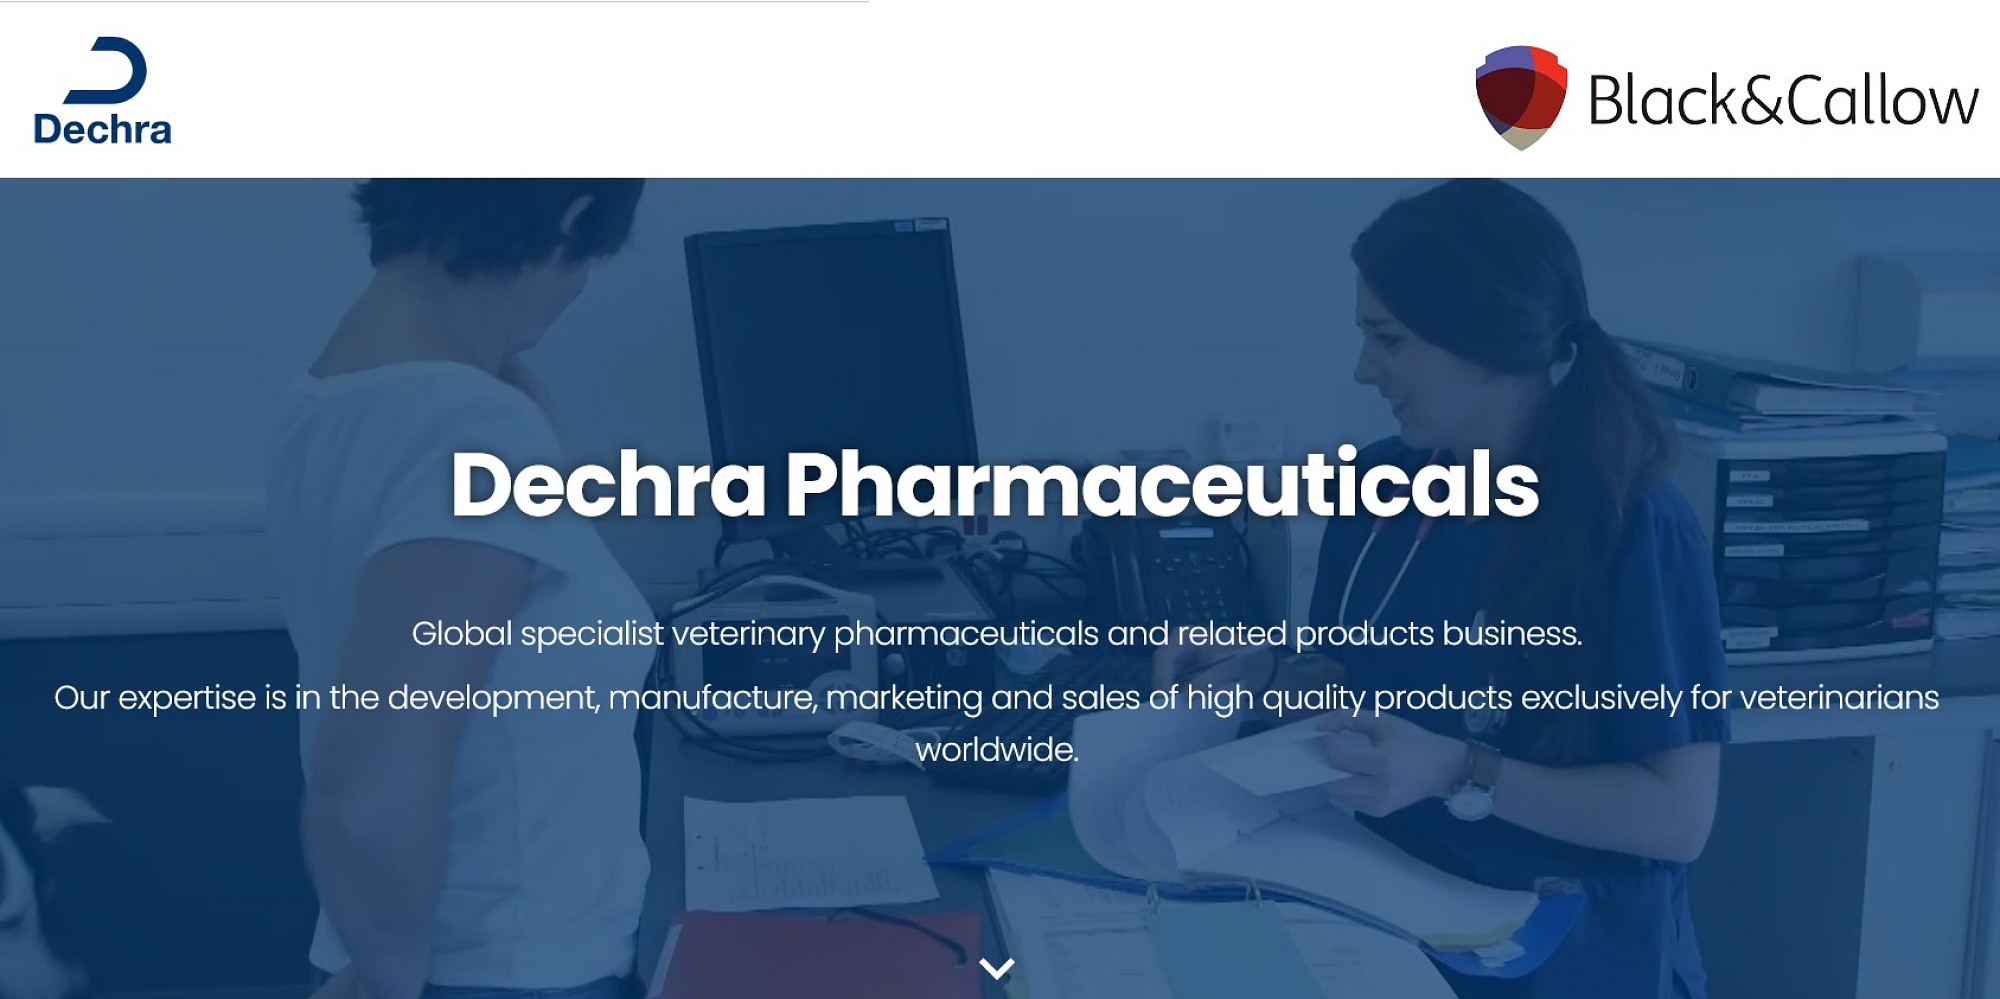 Backing a winner: the £4.5bn takeover of Dechra Pharmaceuticals by EQT